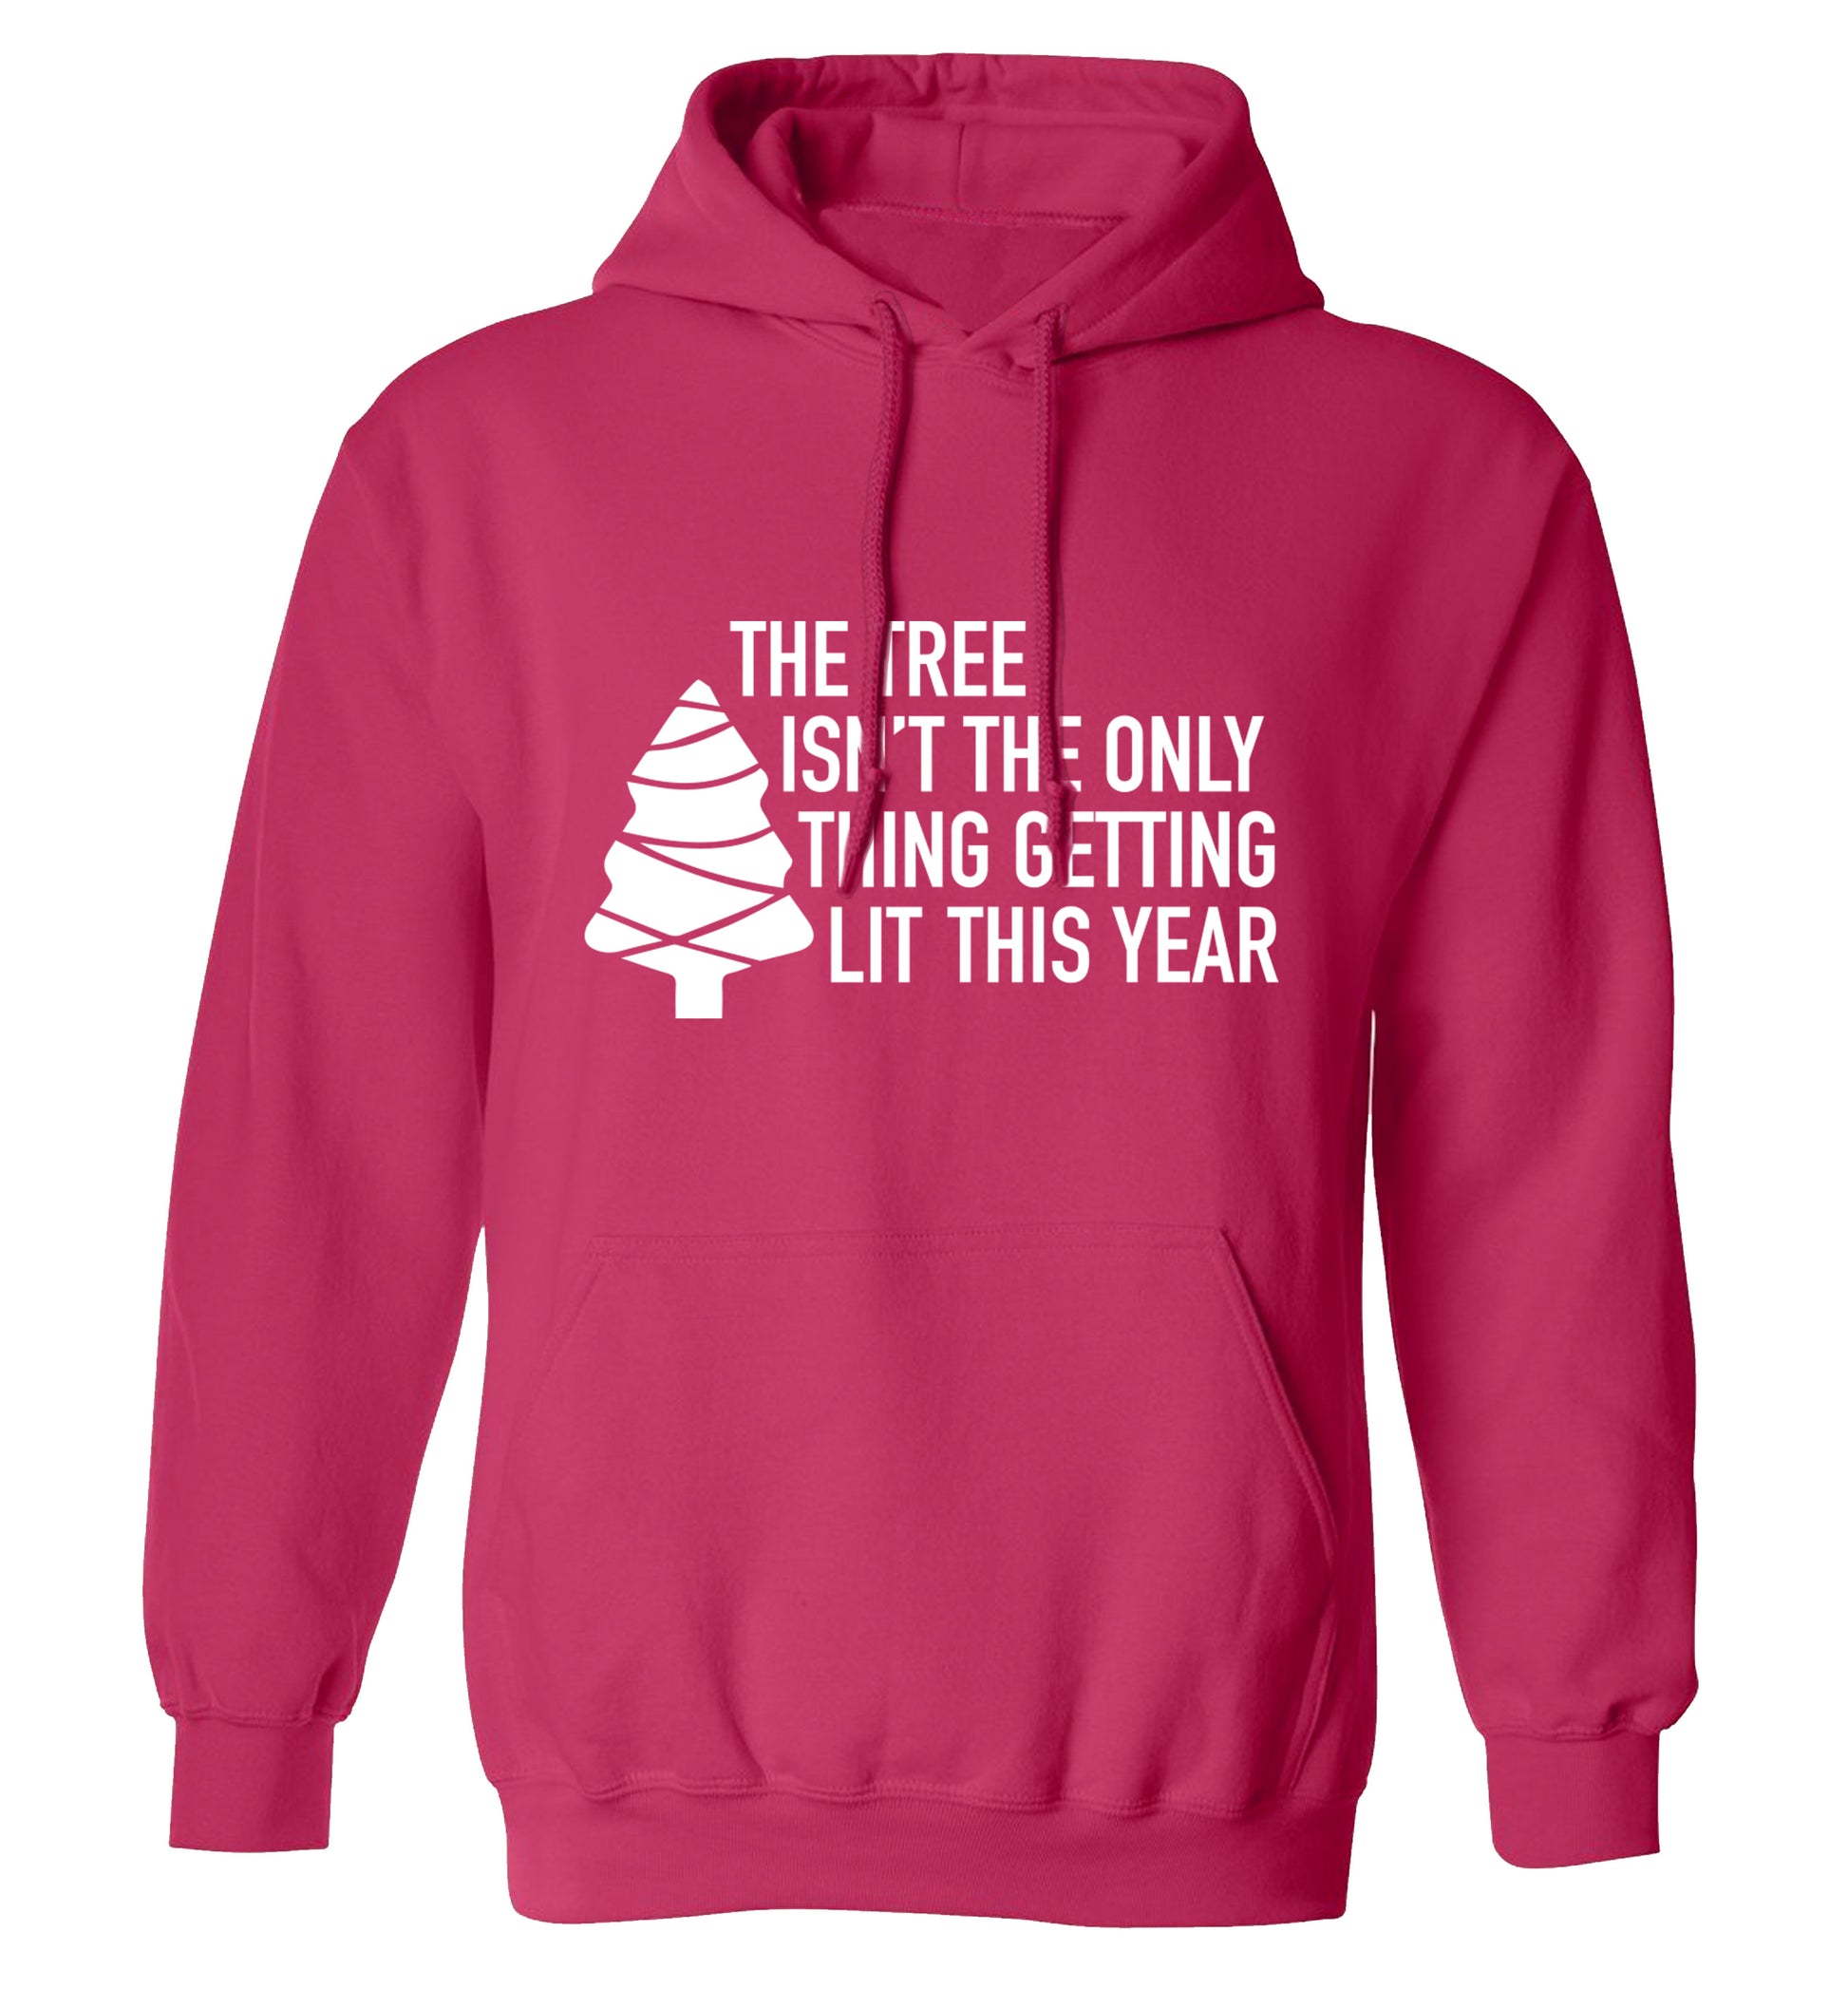 The tree isn't the only thing getting lit this year adults unisex pink hoodie 2XL